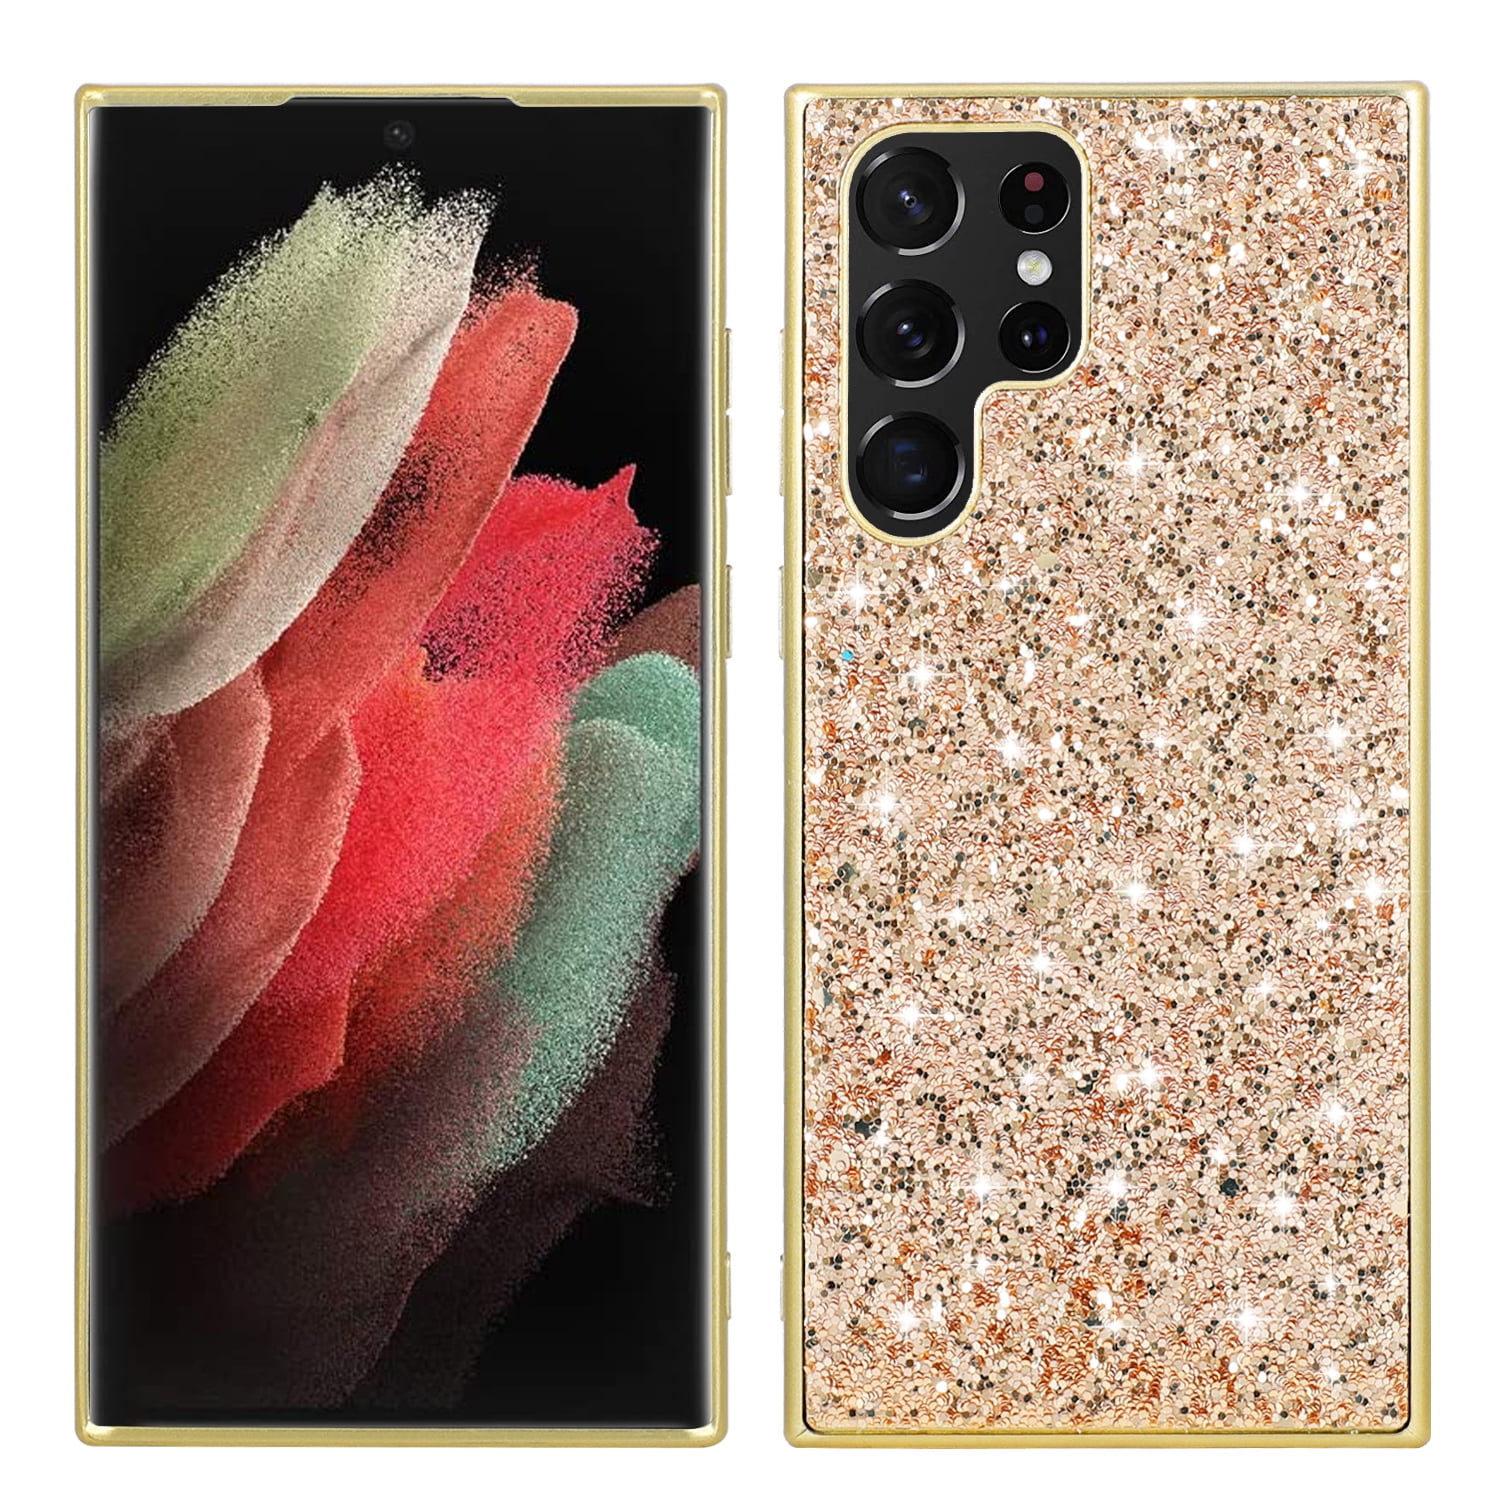 Decase for Samsung Galaxy S23 Ultra Case Cute Bling Butterfly Flower Design  with Ring Stand,Luxury Plating Glitter Girly Diamond Pearl Hard Back Cover  for Samsung S23 Ultra,Pink 